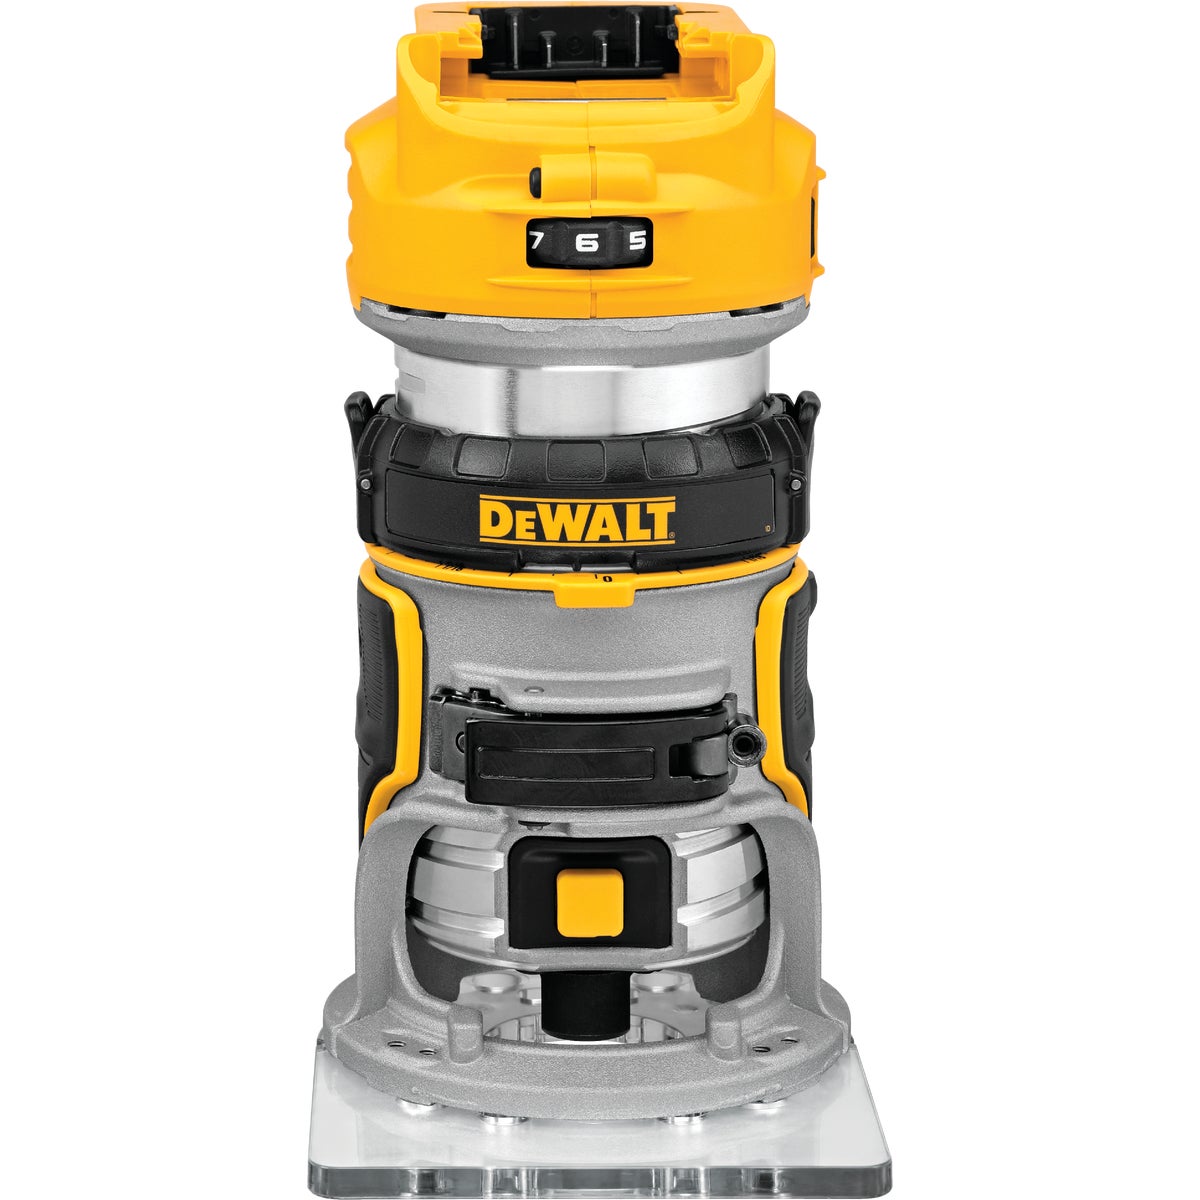 DEWALT 20 Volt MAX XR Lithium-Ion Brushless Compact Cordless Router (Tool Only)